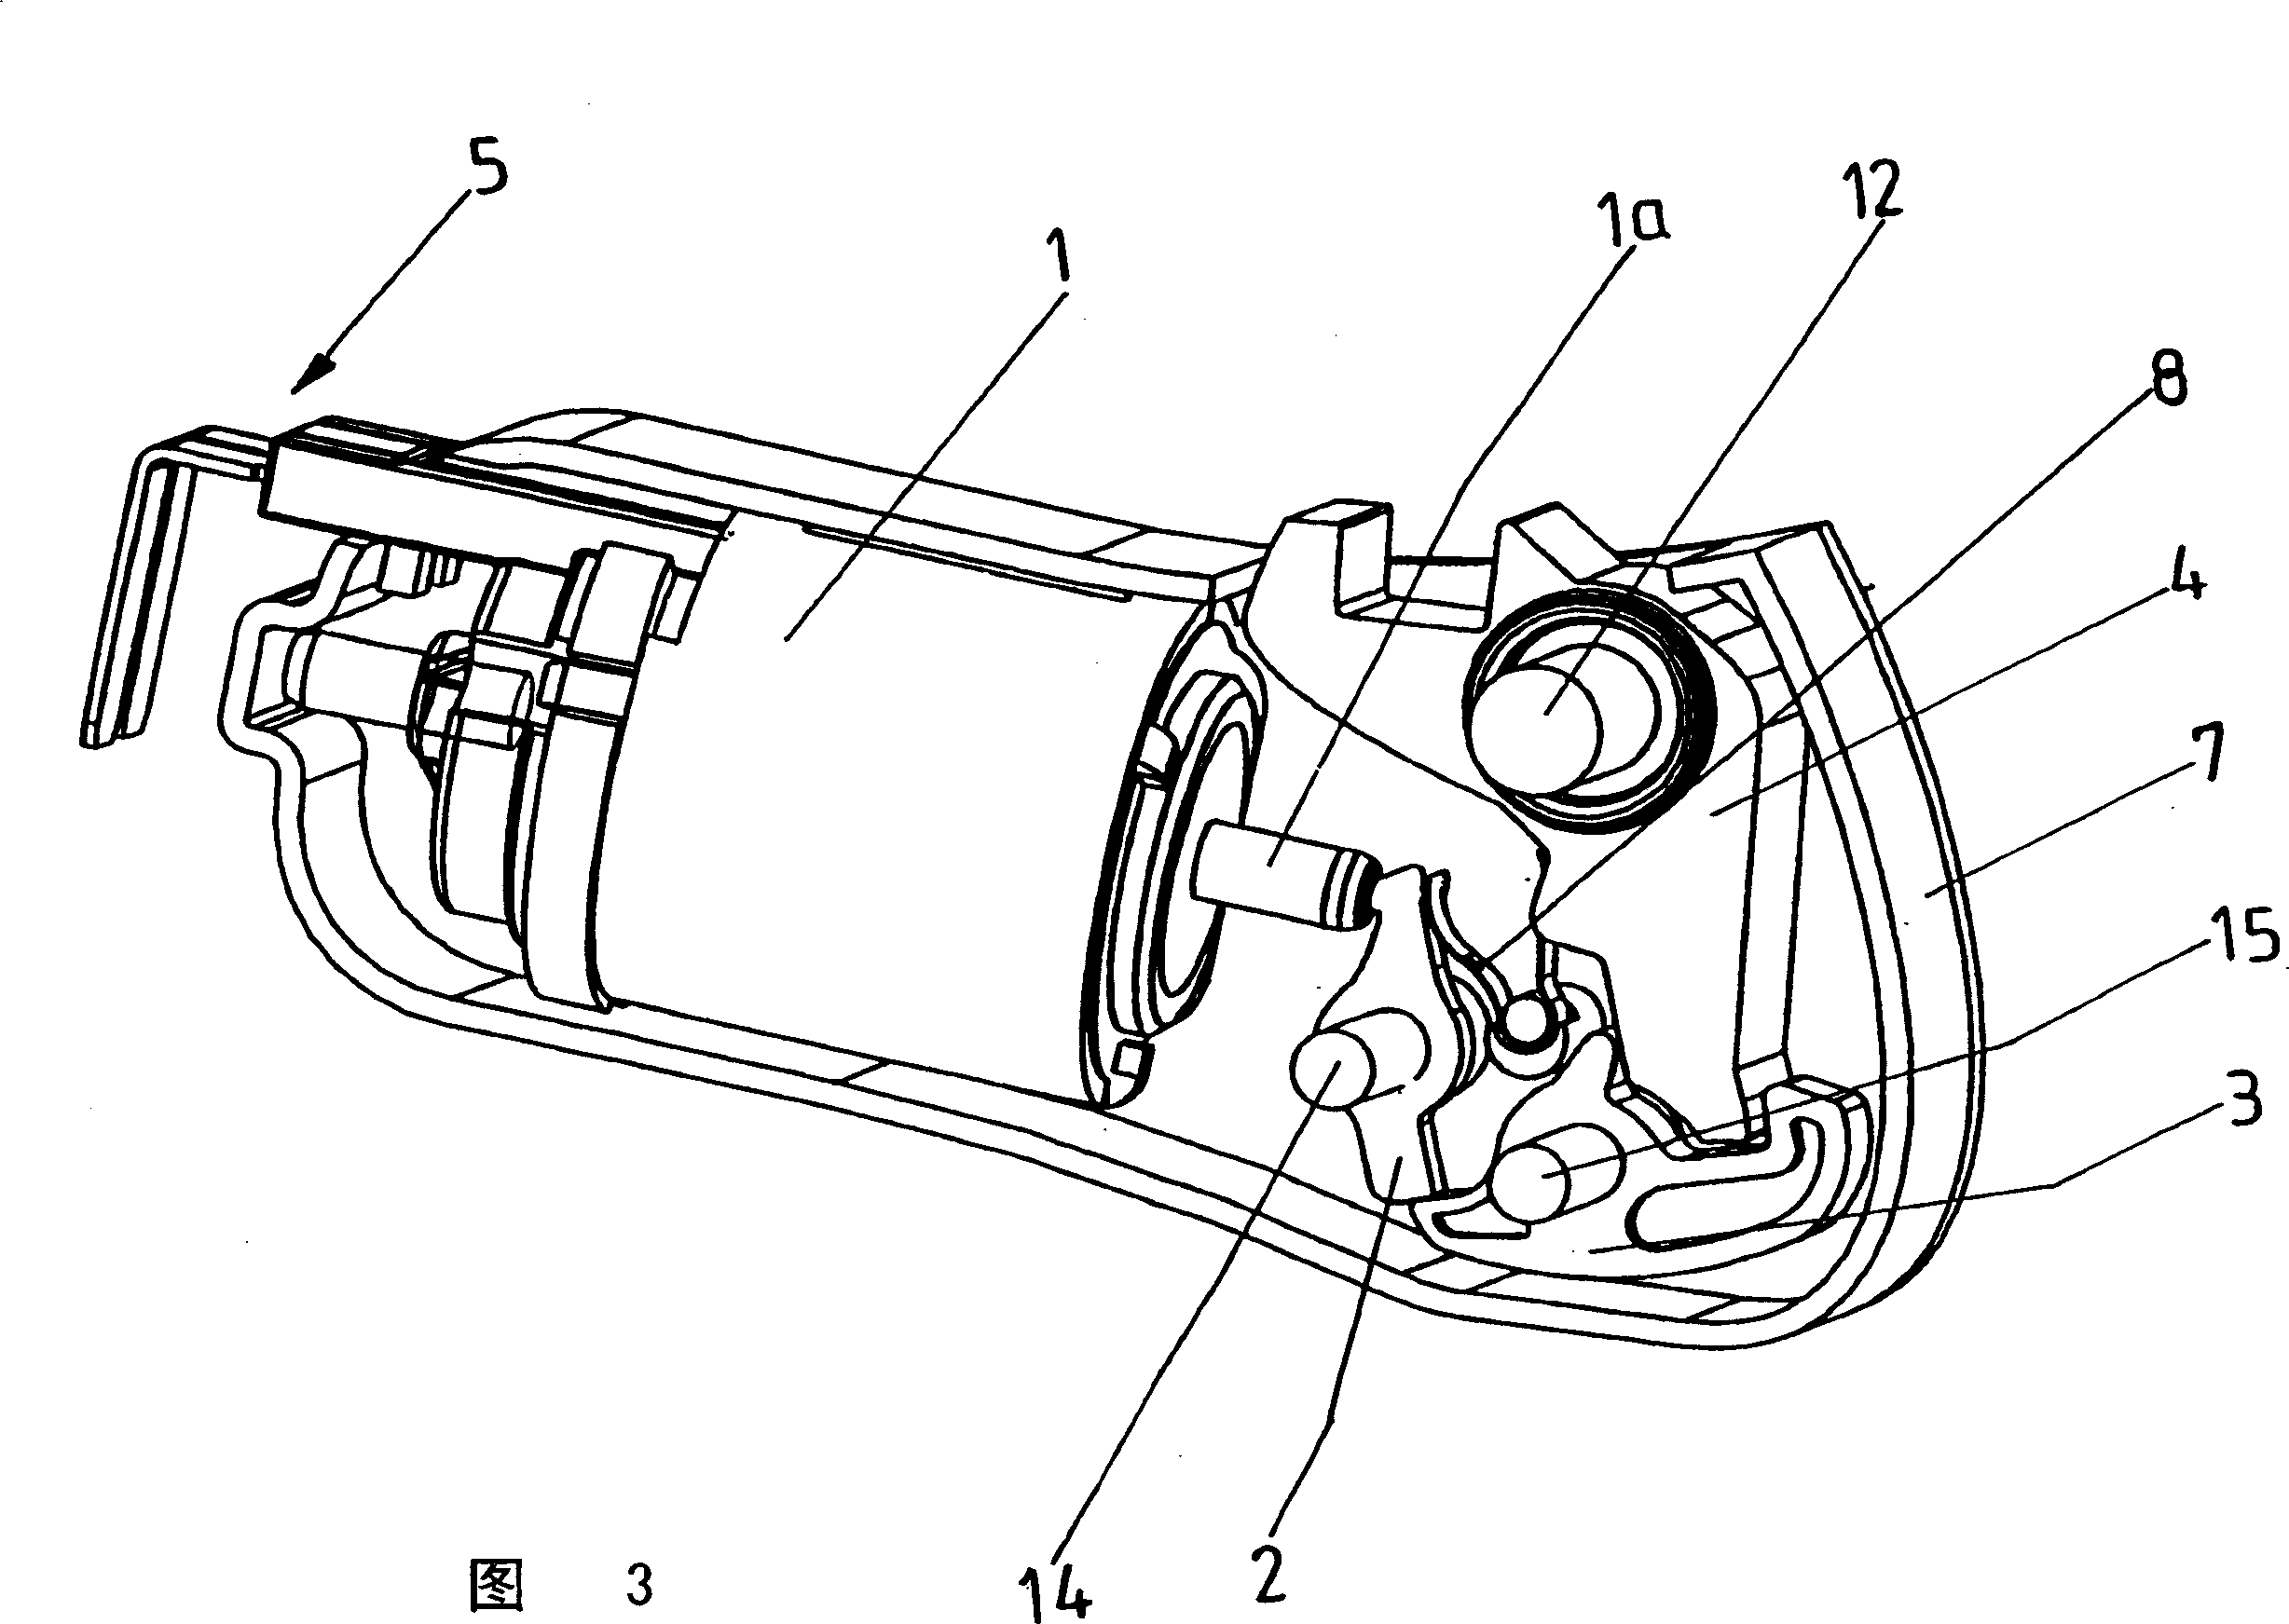 Apparatus for locking and fast unlocking of movable parts